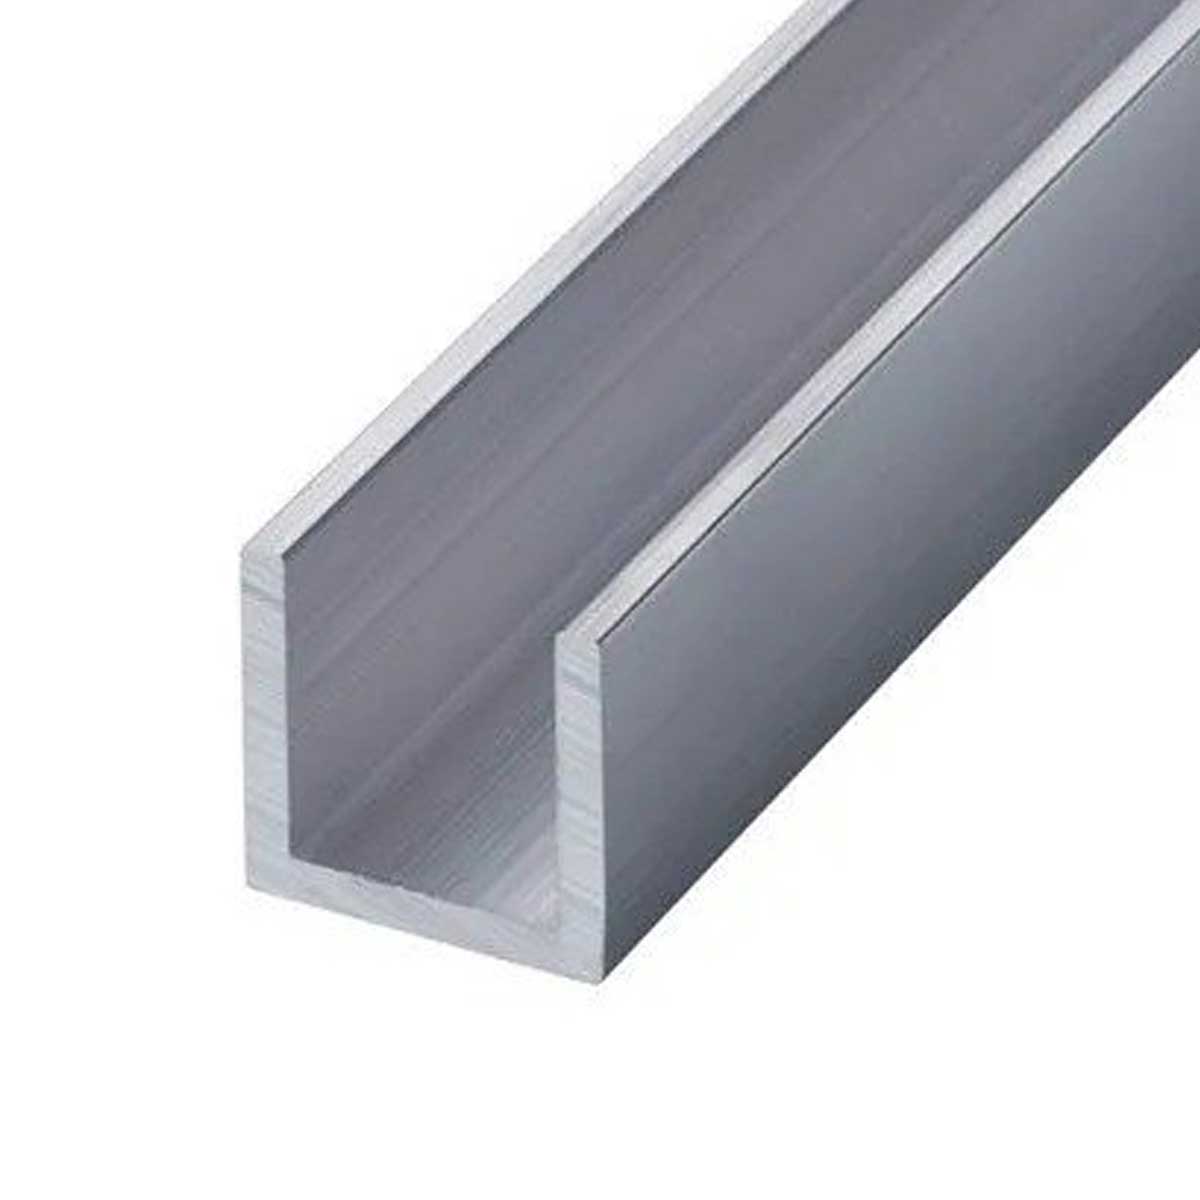 Aluminium C Channel For Construction Manufacturers, Suppliers in Anantapur